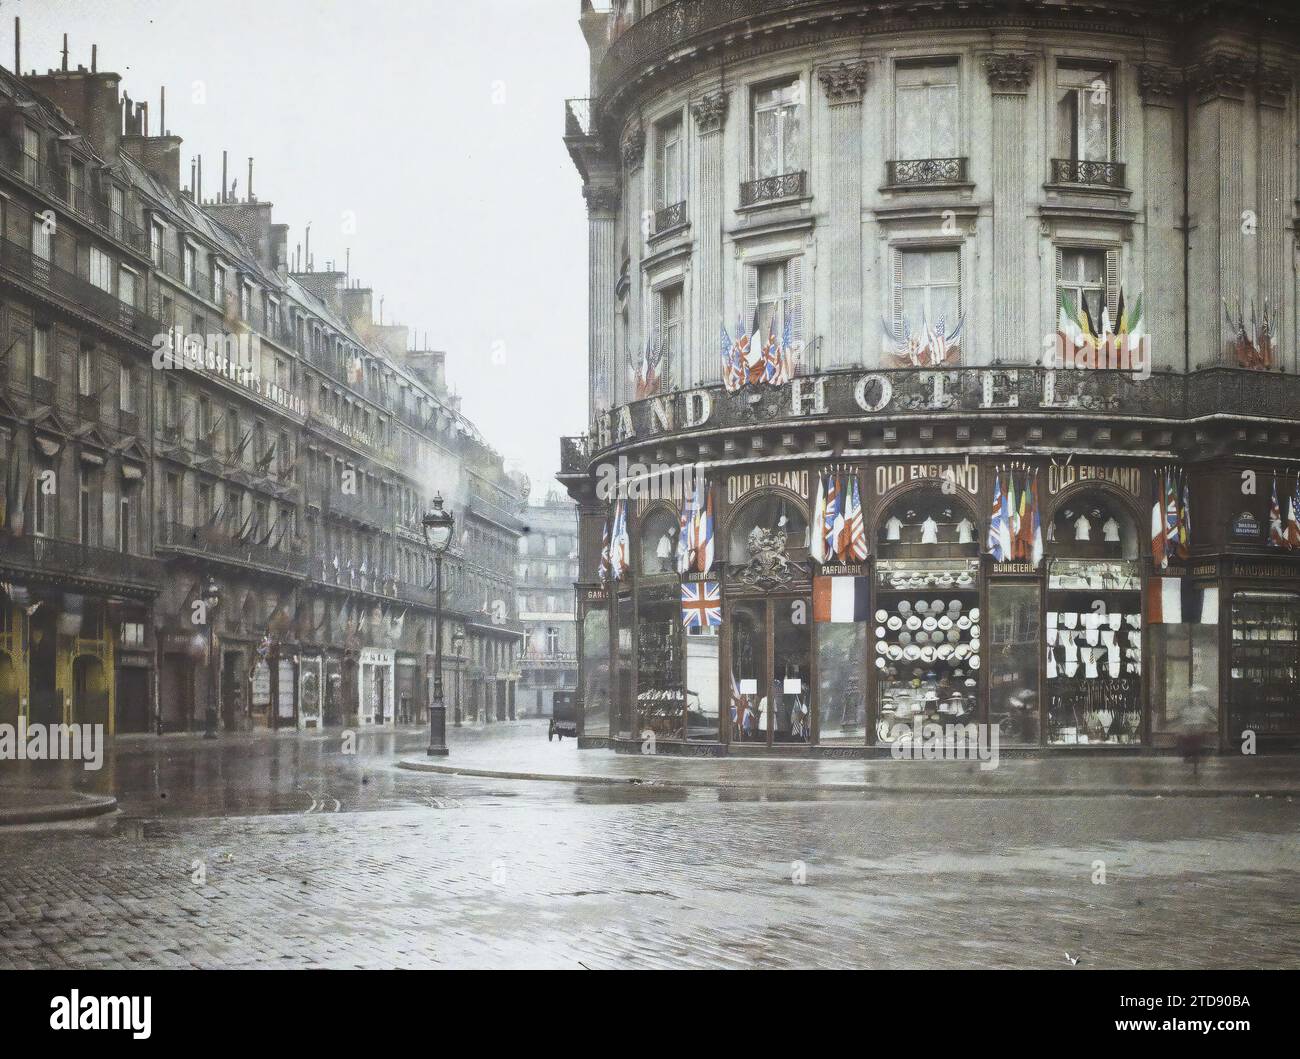 Paris (9th arr.), France The Old England store decked out for the Victory celebrations at the corner of rue Scribe and boulevard des Capucines, Economic activity, Festival, First World War, Housing, Architecture, Boutique, store, Political celebration, Commemoration, Street, District, Post-war, Flag, France, Paris, Boulevard des Capucines, a store adorned with flags for Victory Day, Grande-Bretagne [en relation avec la], Arrondissement IX, 30/06/1919 - 30/06/1919, Cuville, Fernand, Autochrome, photo, Glass, Autochrome, photo, Positive, Horizontal, Size 9 x 12 cm Stock Photo